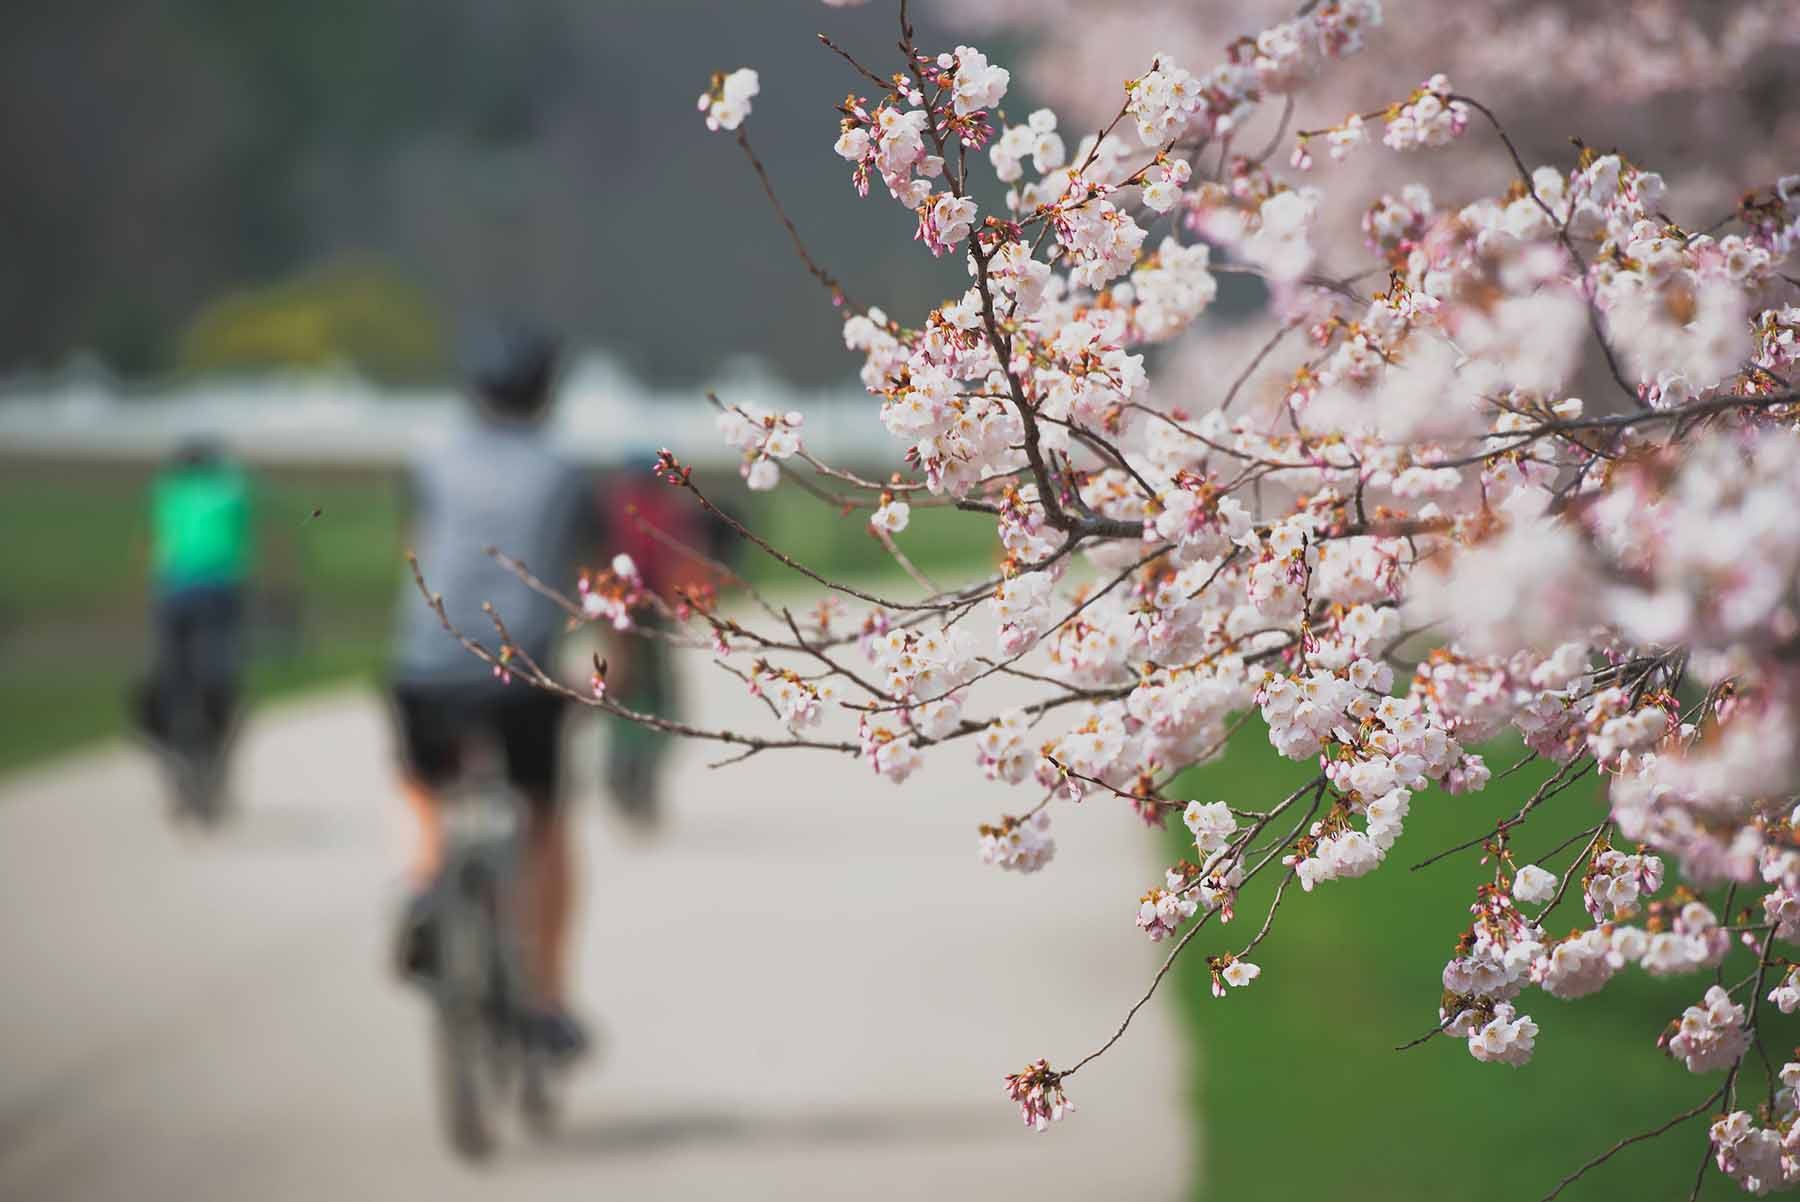 Out of focus cyclists going past a flowering cherry blossom tree